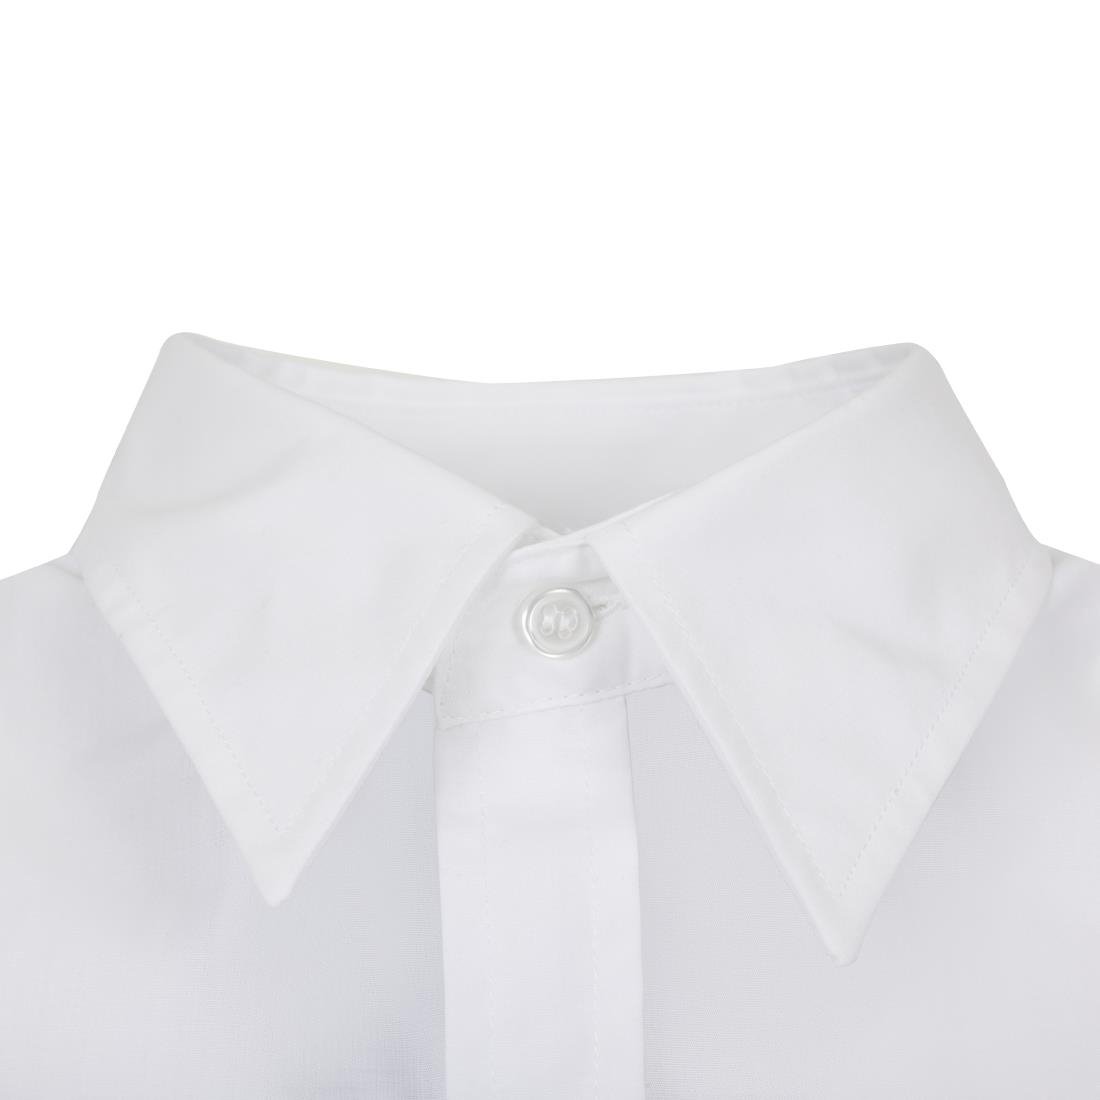 A730-S Chef Works Unisex Long Sleeve Shirt White S JD Catering Equipment Solutions Ltd